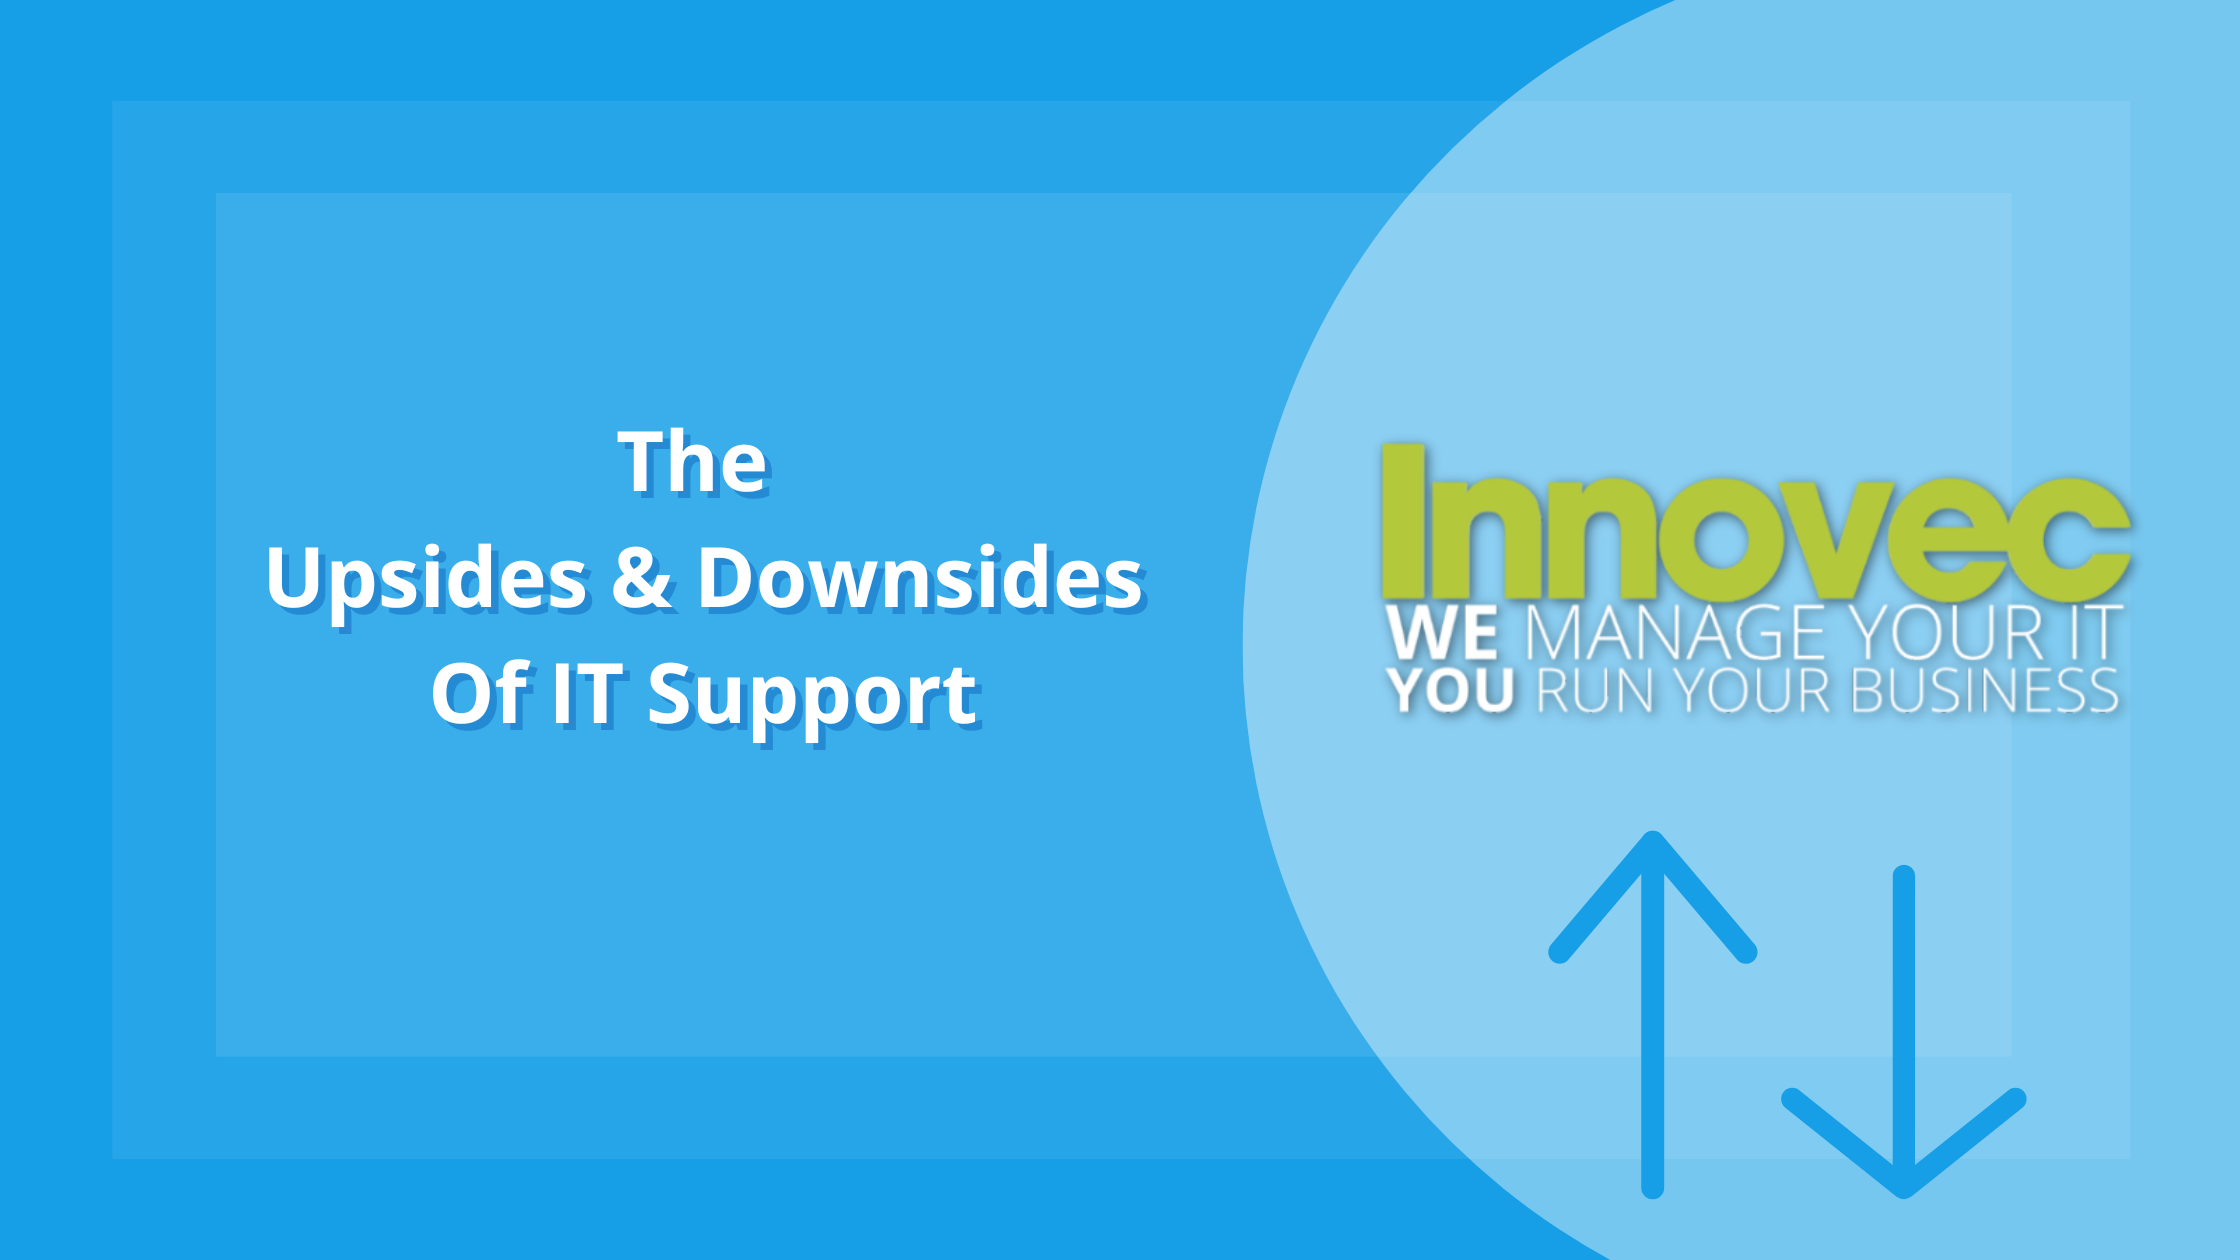 The Upsides And Downsides Of IT Support